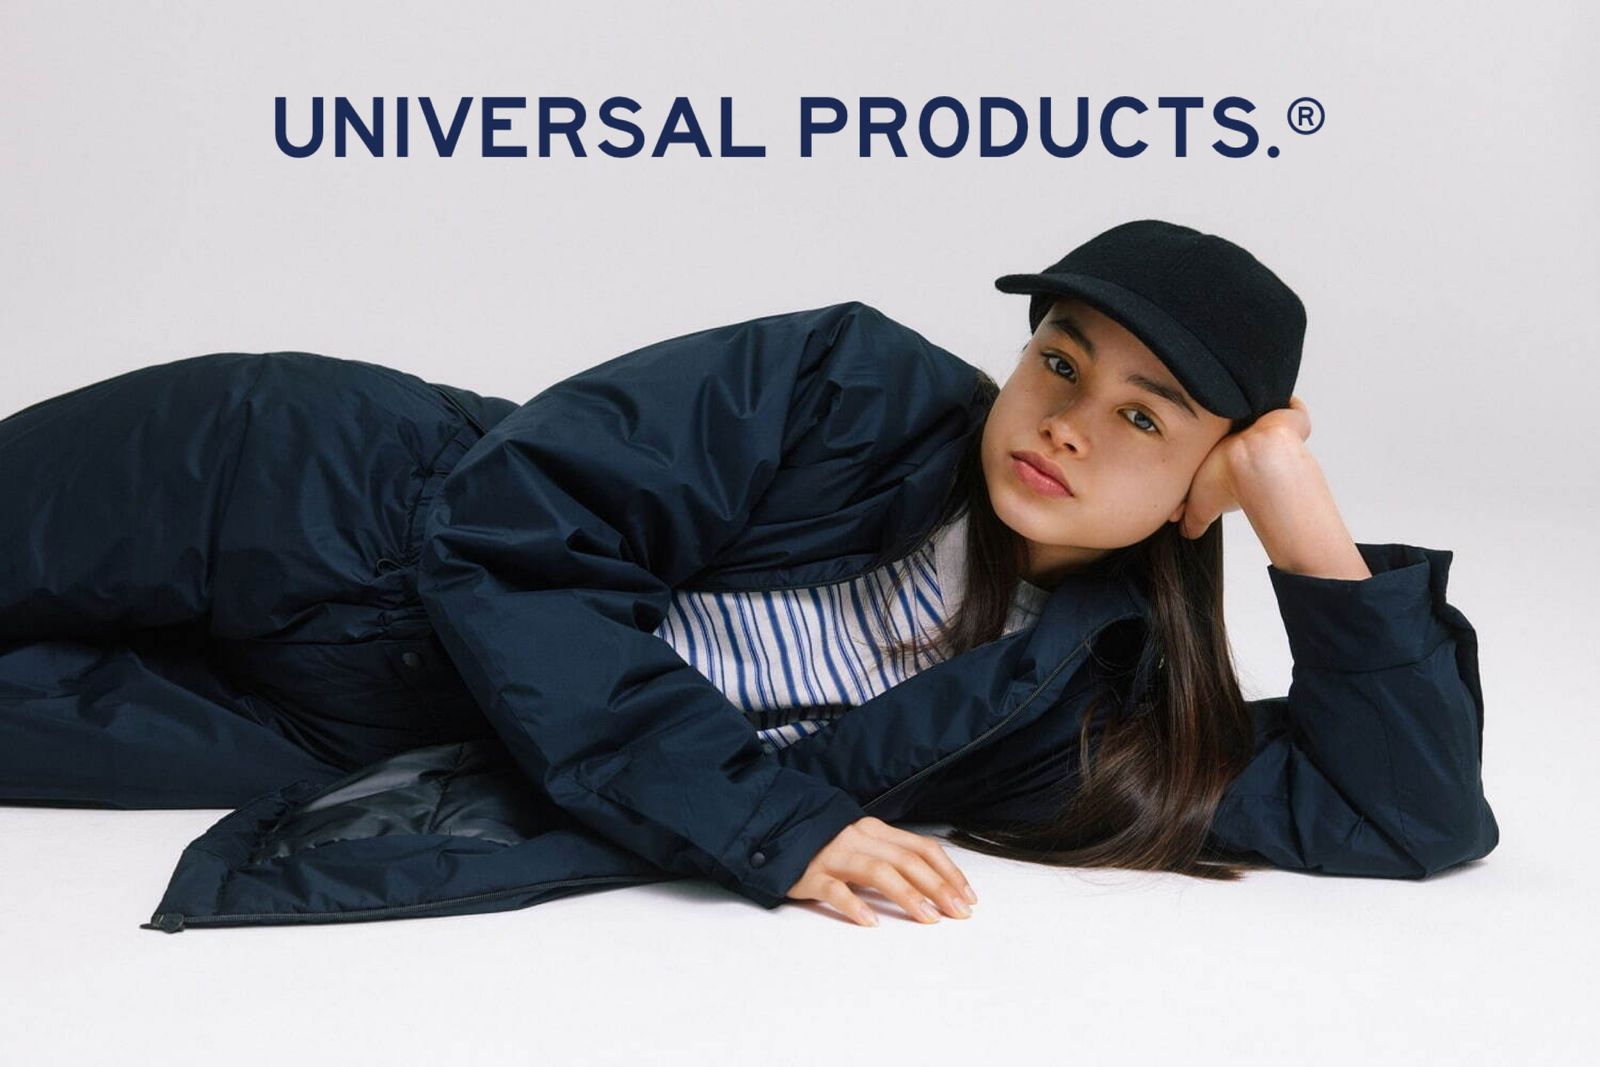 UNIVERSAL PRODUCTS - ユニバーサルプロダクツ 通販 | asterisk